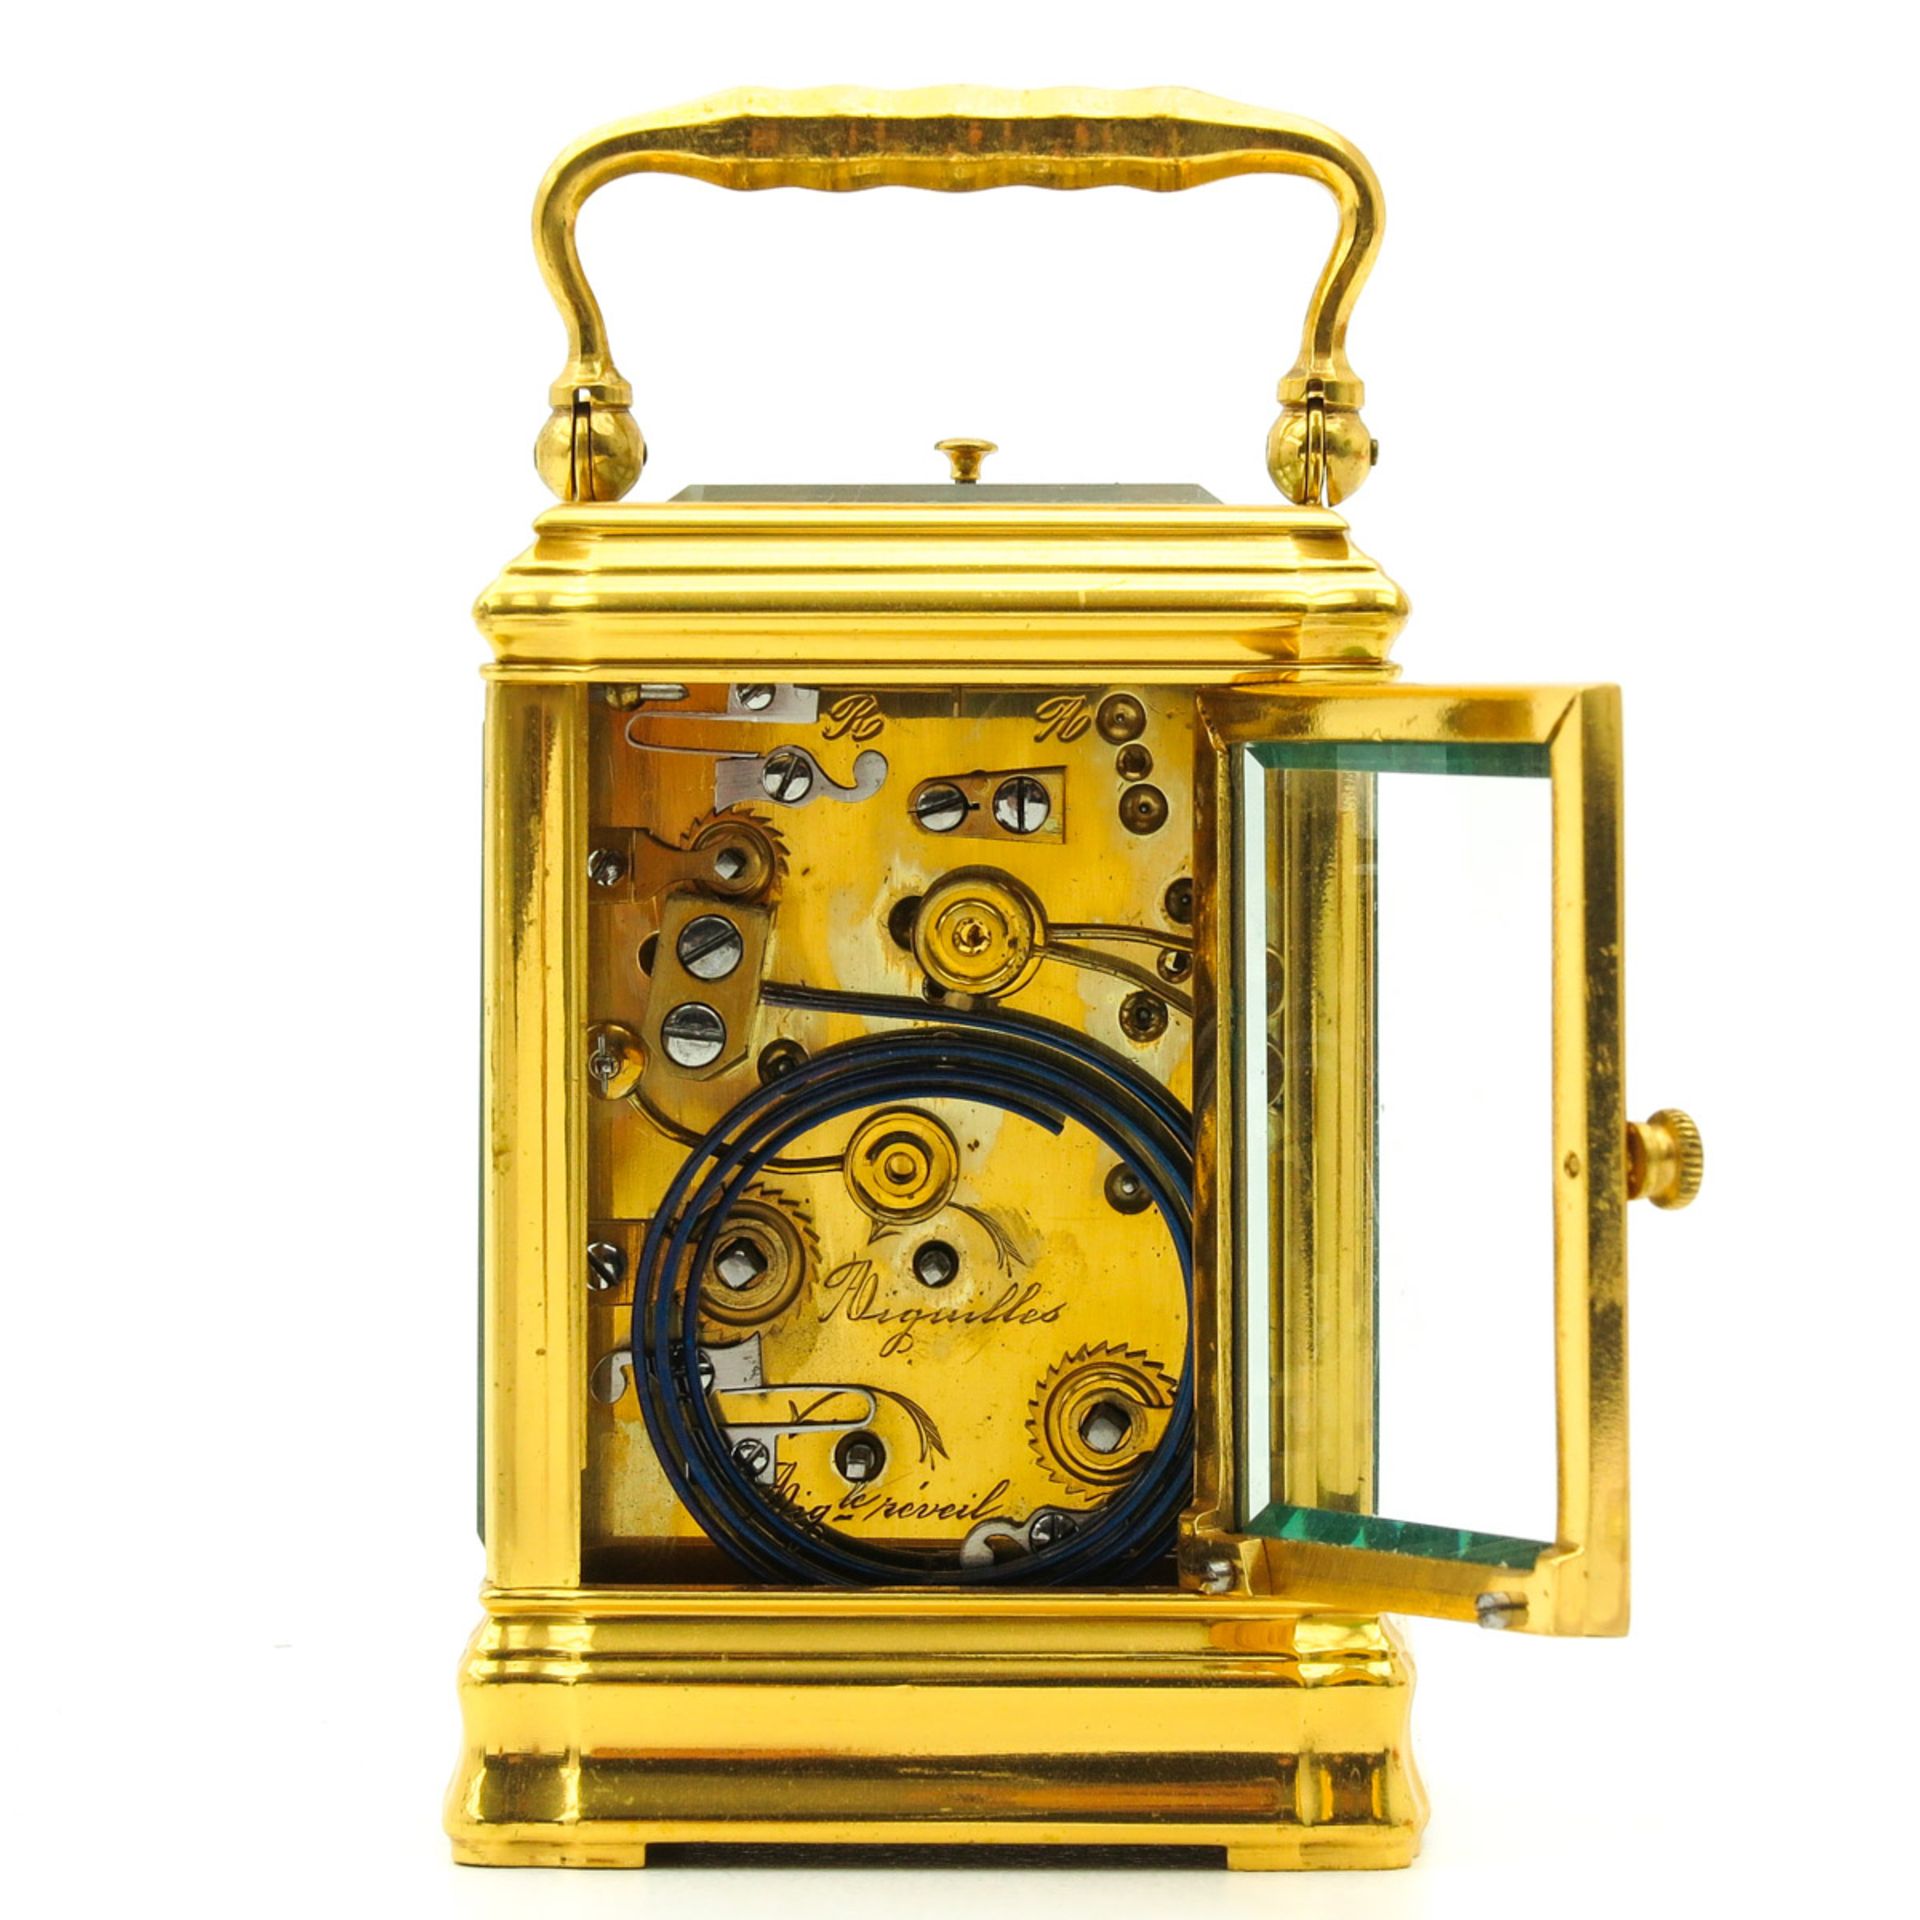 Carriage Clock - Image 3 of 5